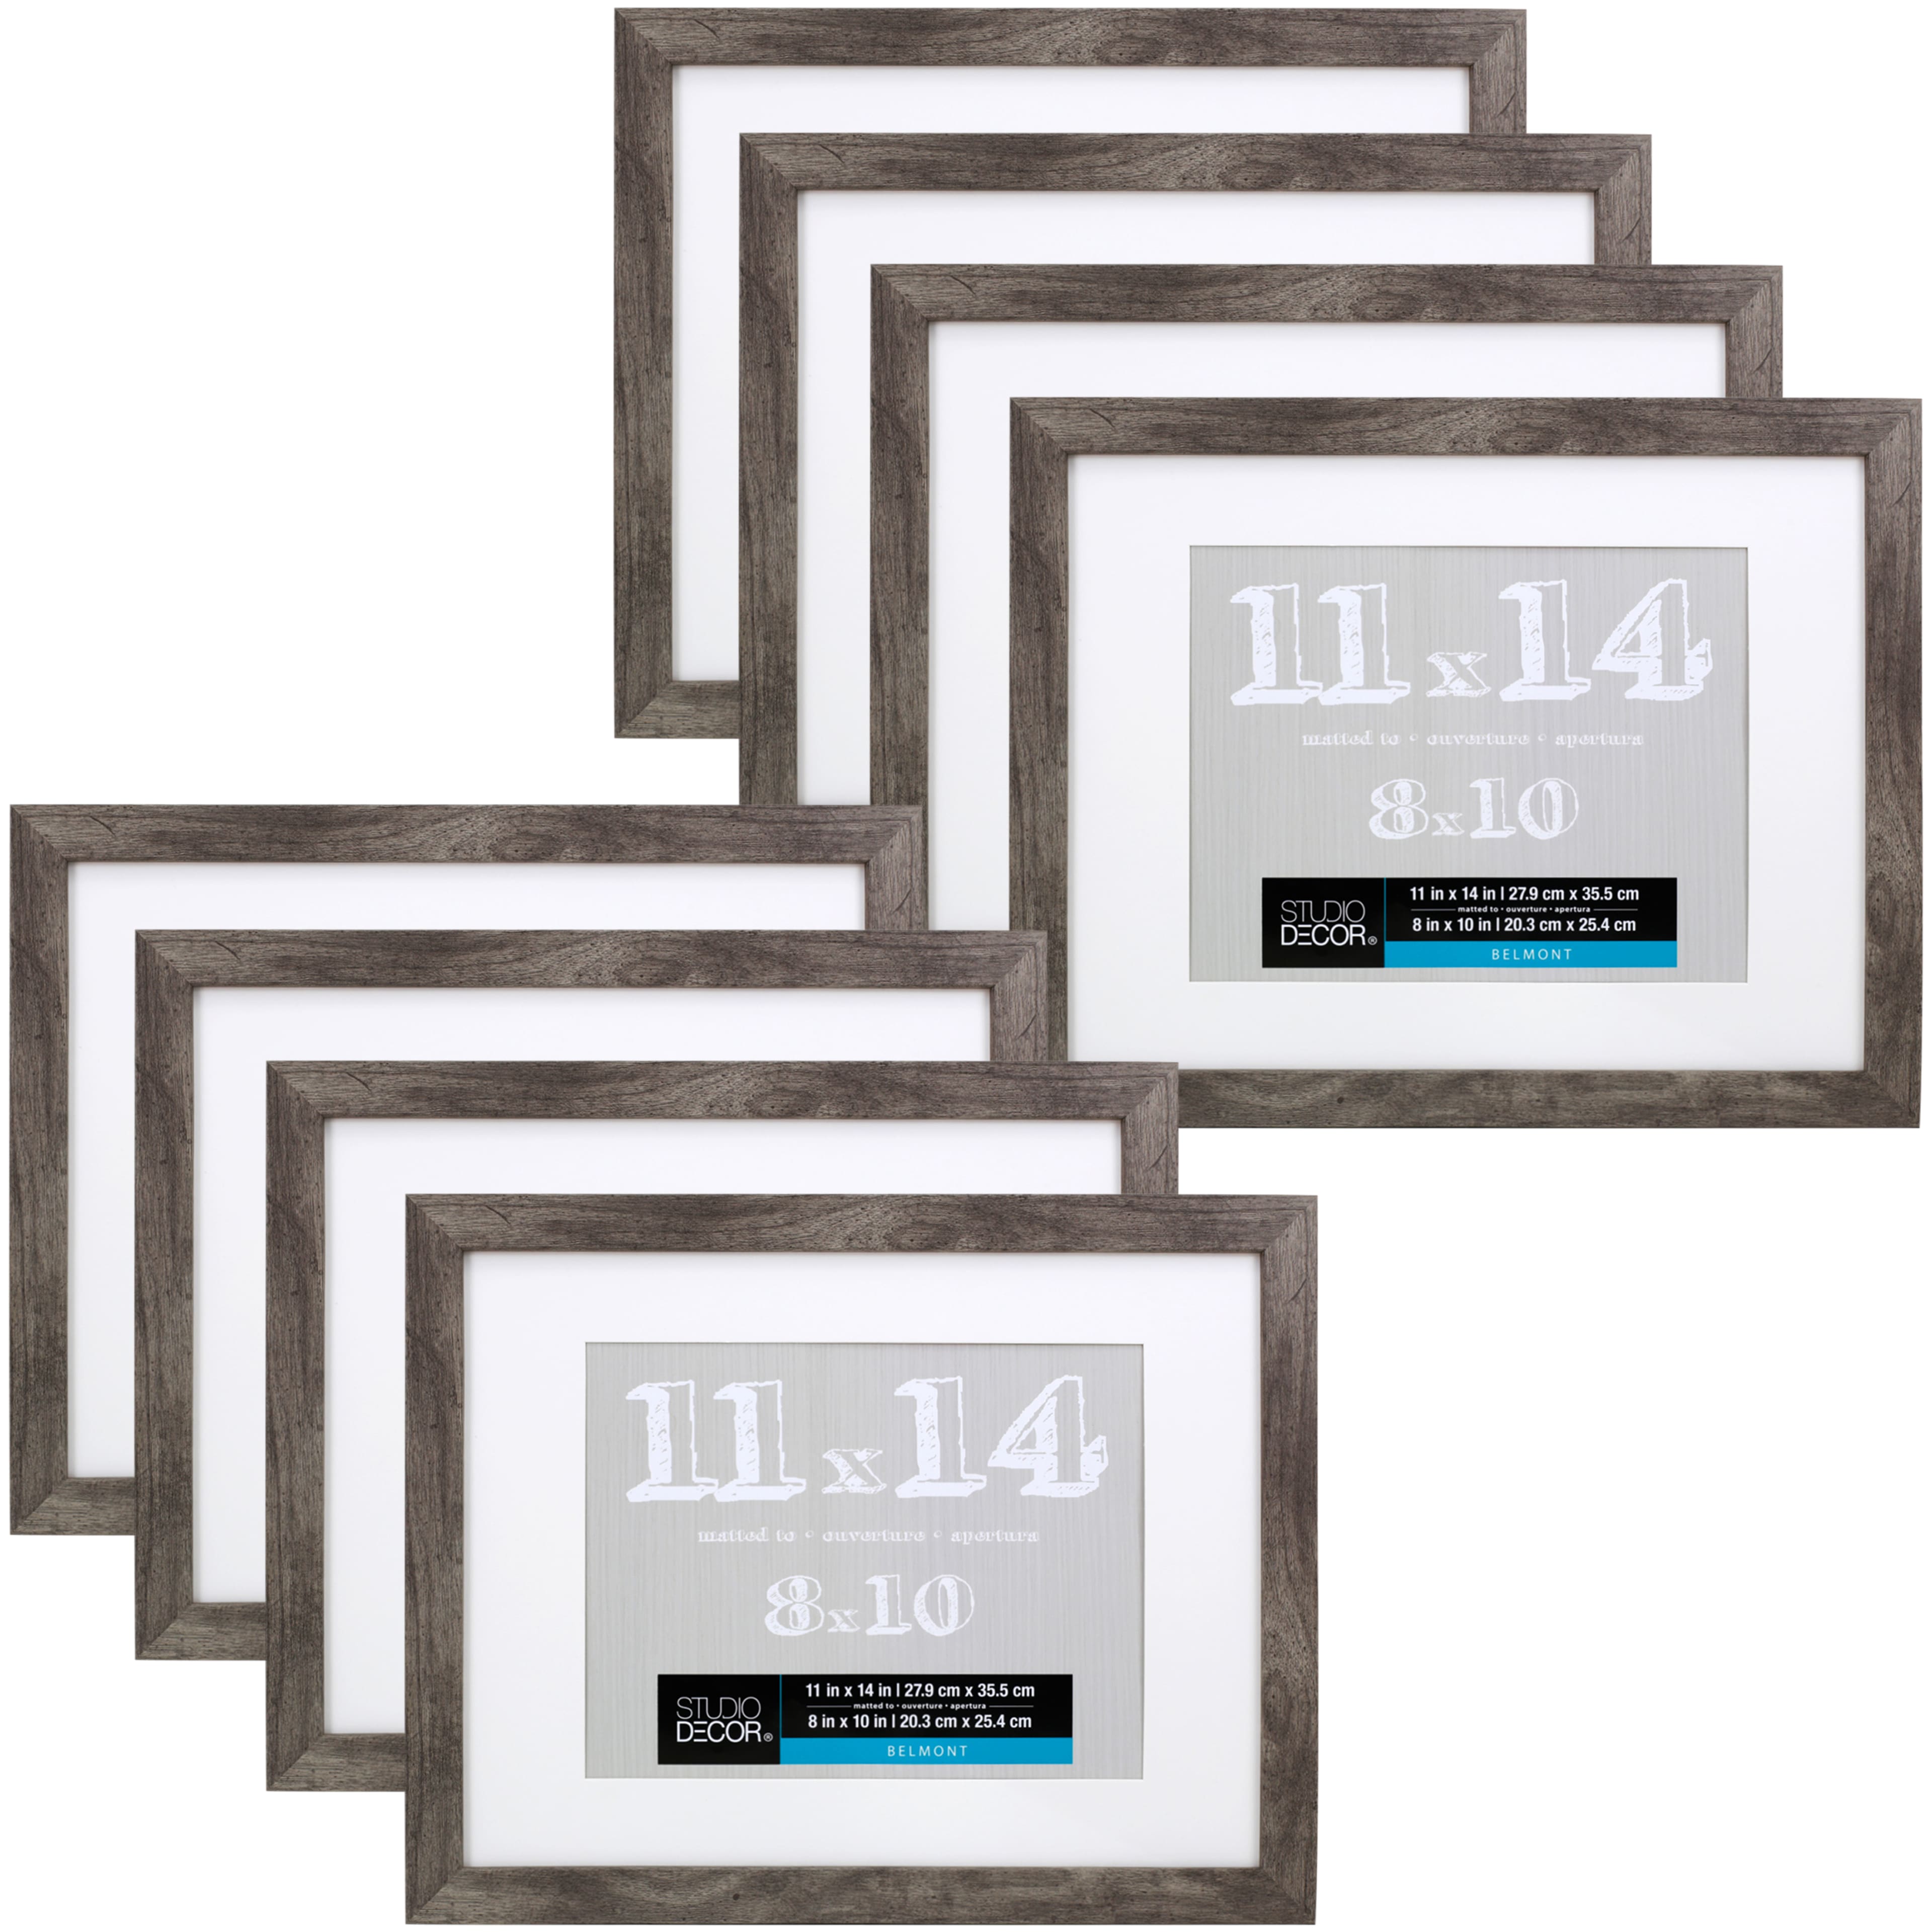 Buy in Bulk - 8 Pack: Gray Belmont Frame With Mat by Studio Décor ...